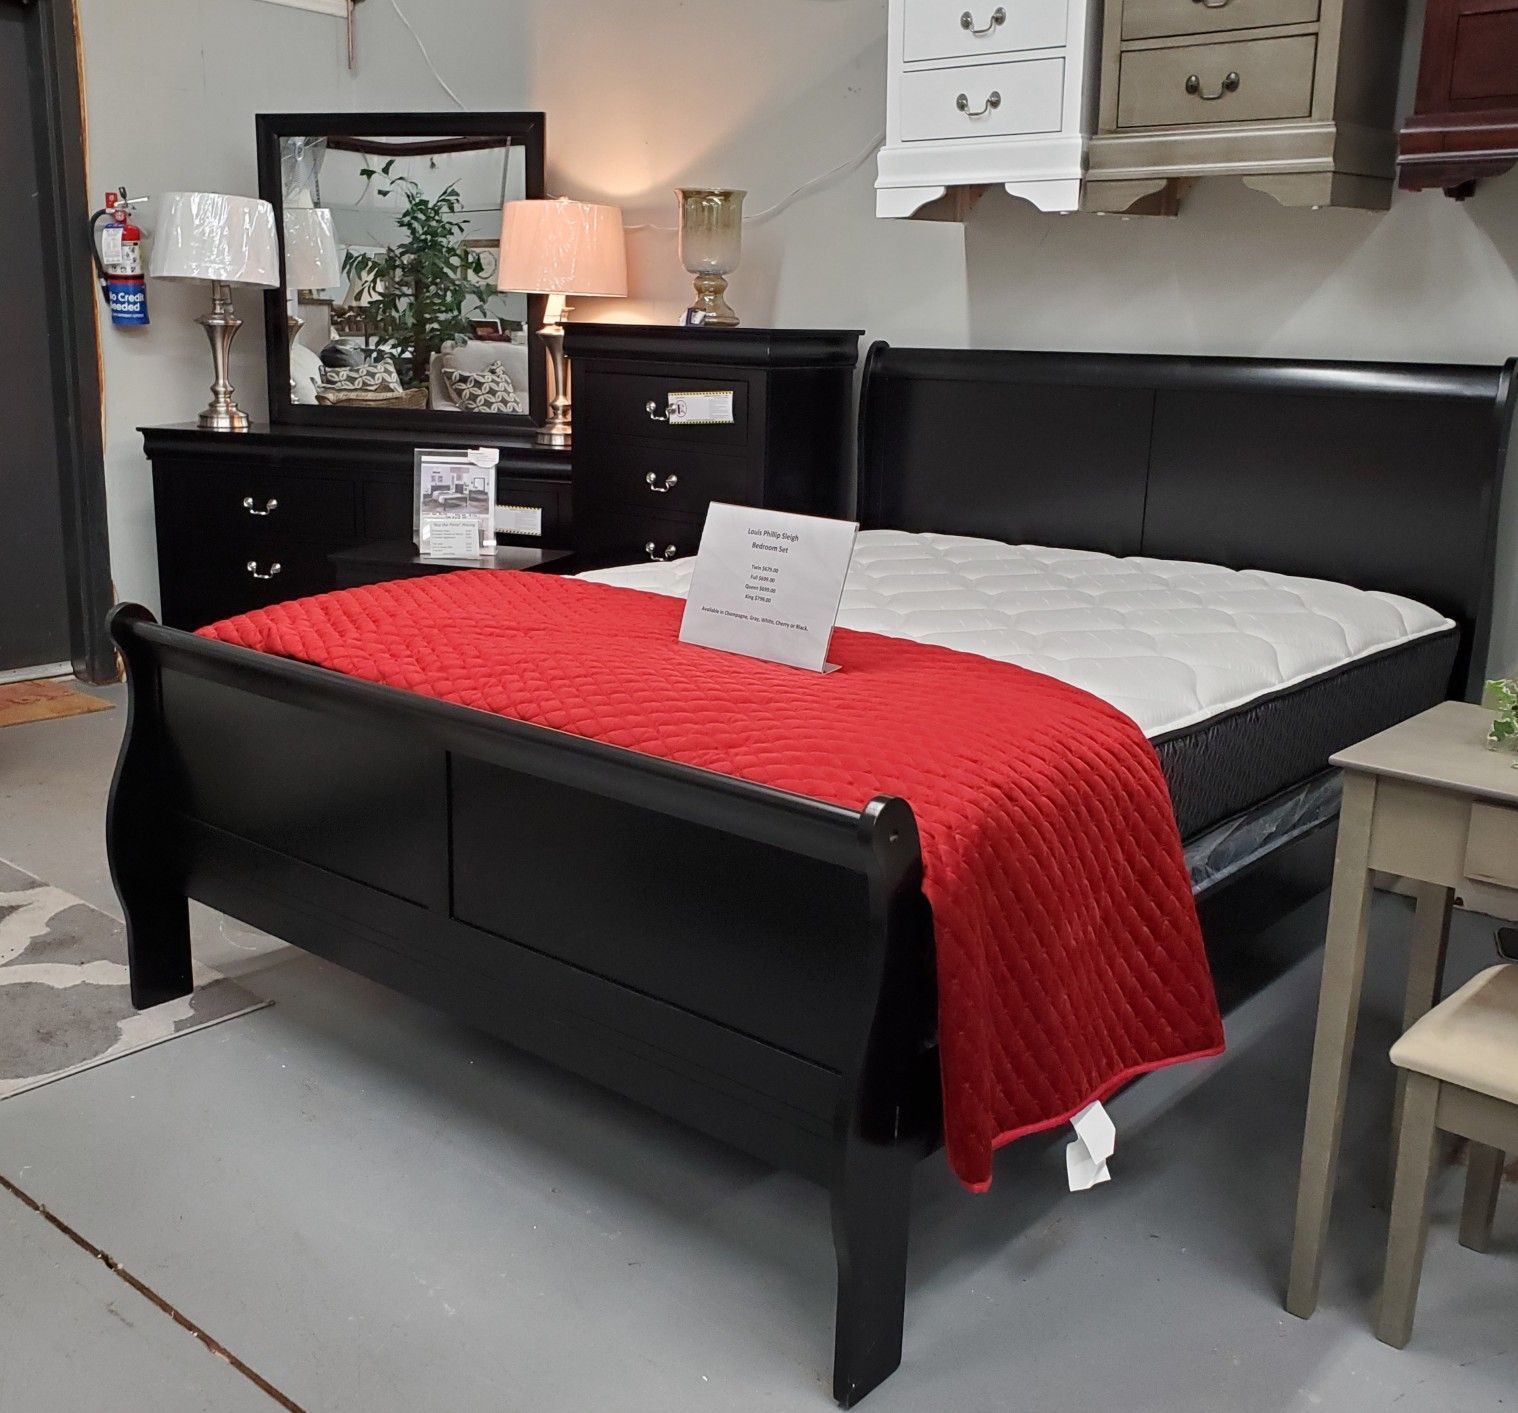 New sleigh bedroom set - all sizes in stock